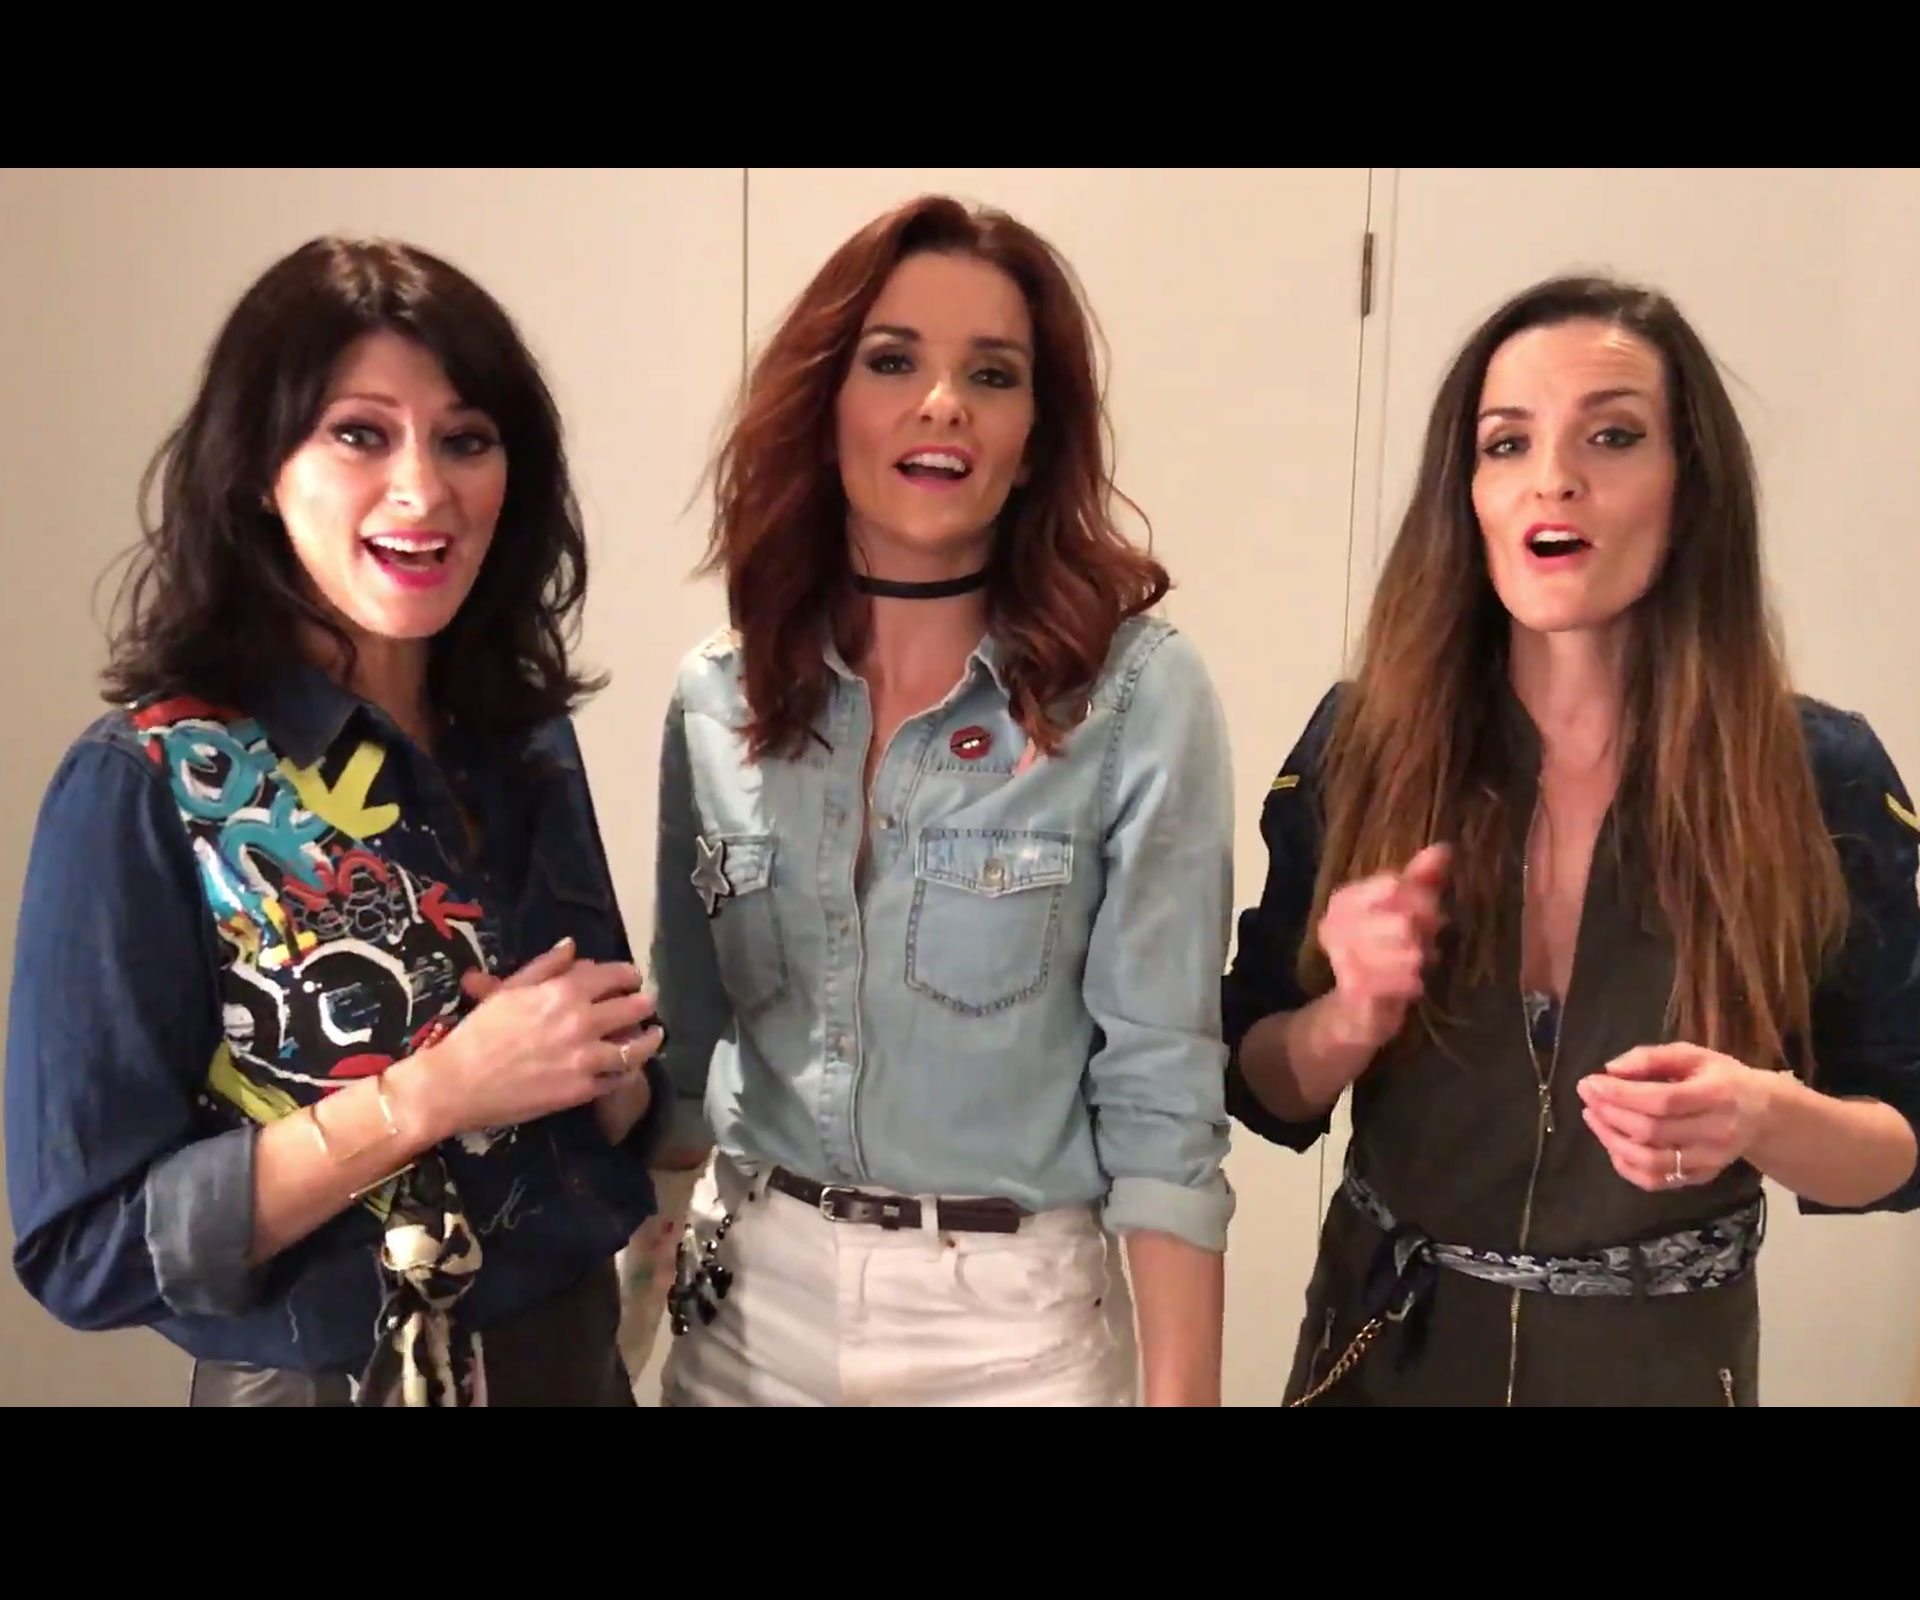 Girl power hits Auckland with B*witched and Atomic Kitten reunion